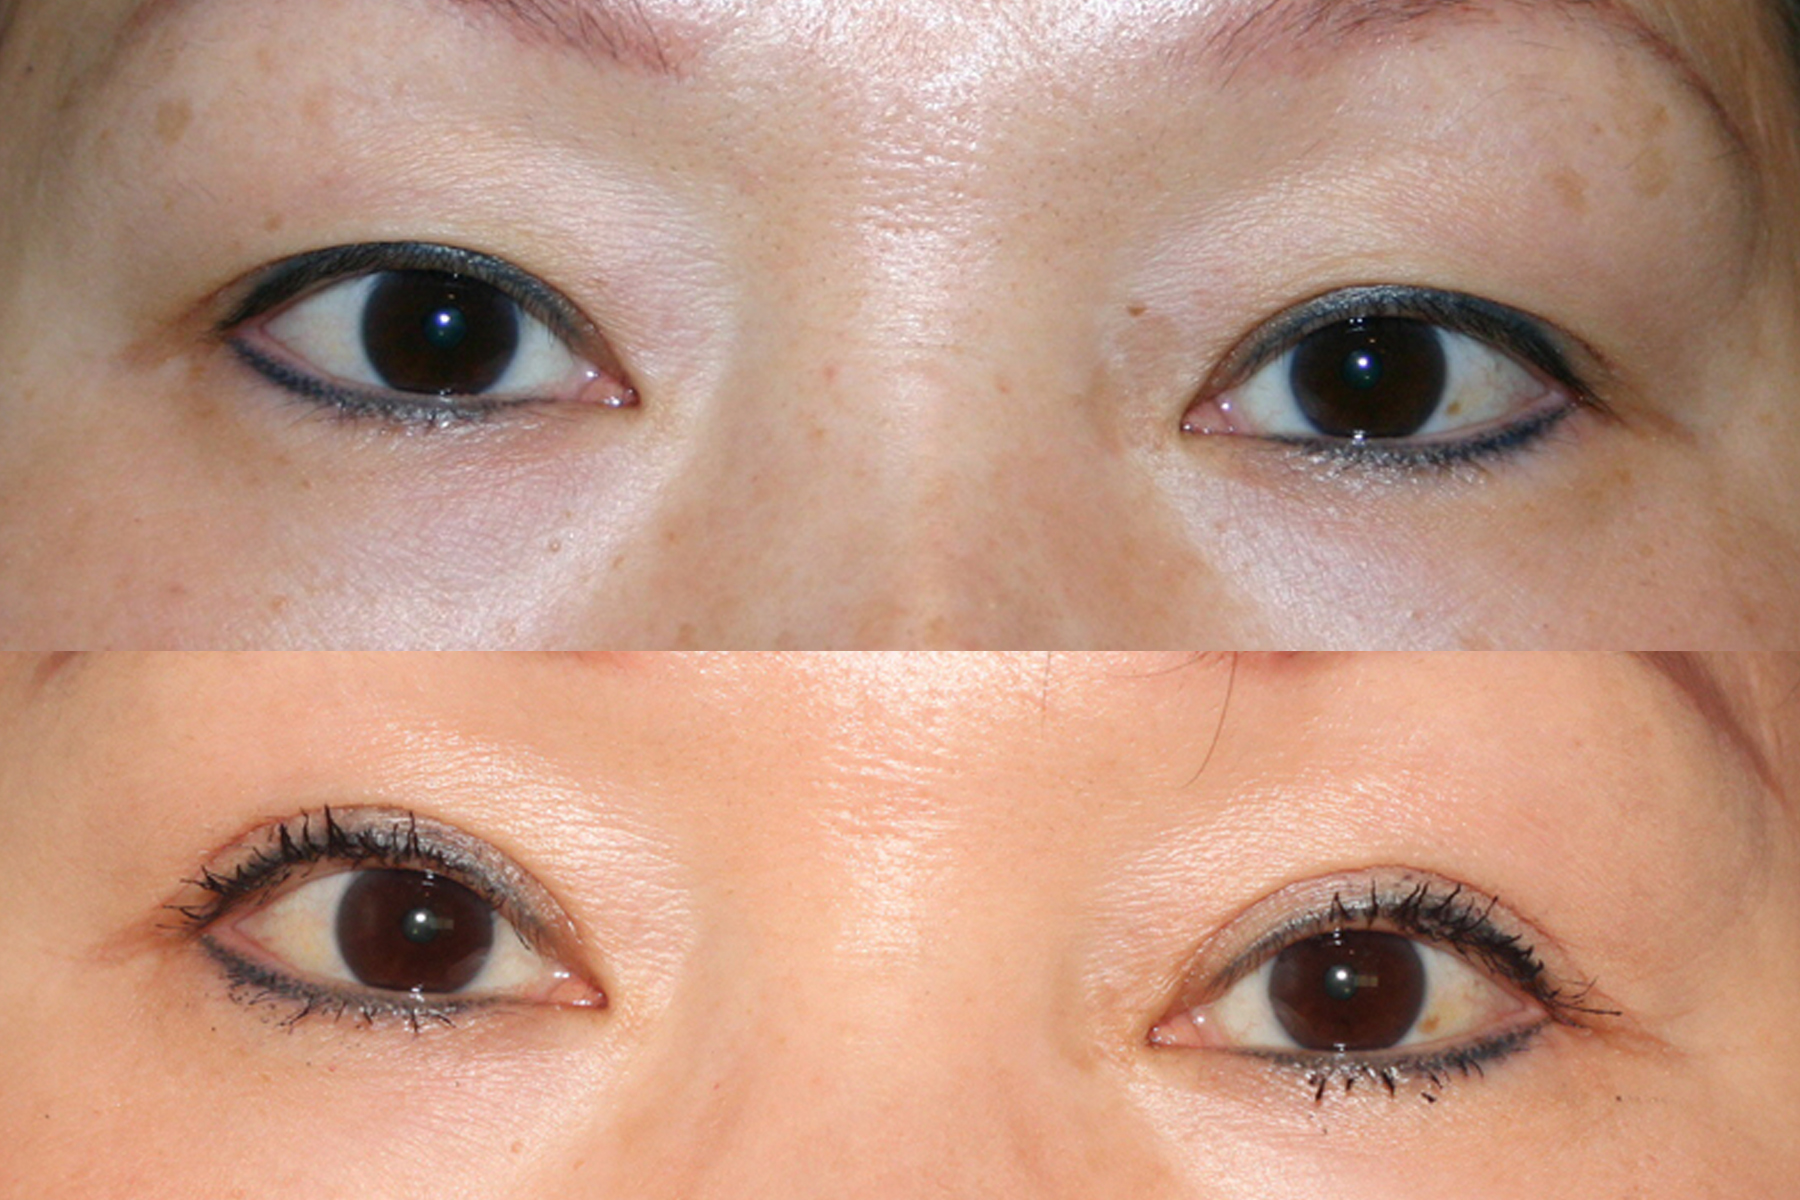 Before and after image of Asian plastic surgery on a young female who has undergone Asian eyelid surgery to create a more defined eyelid crease.